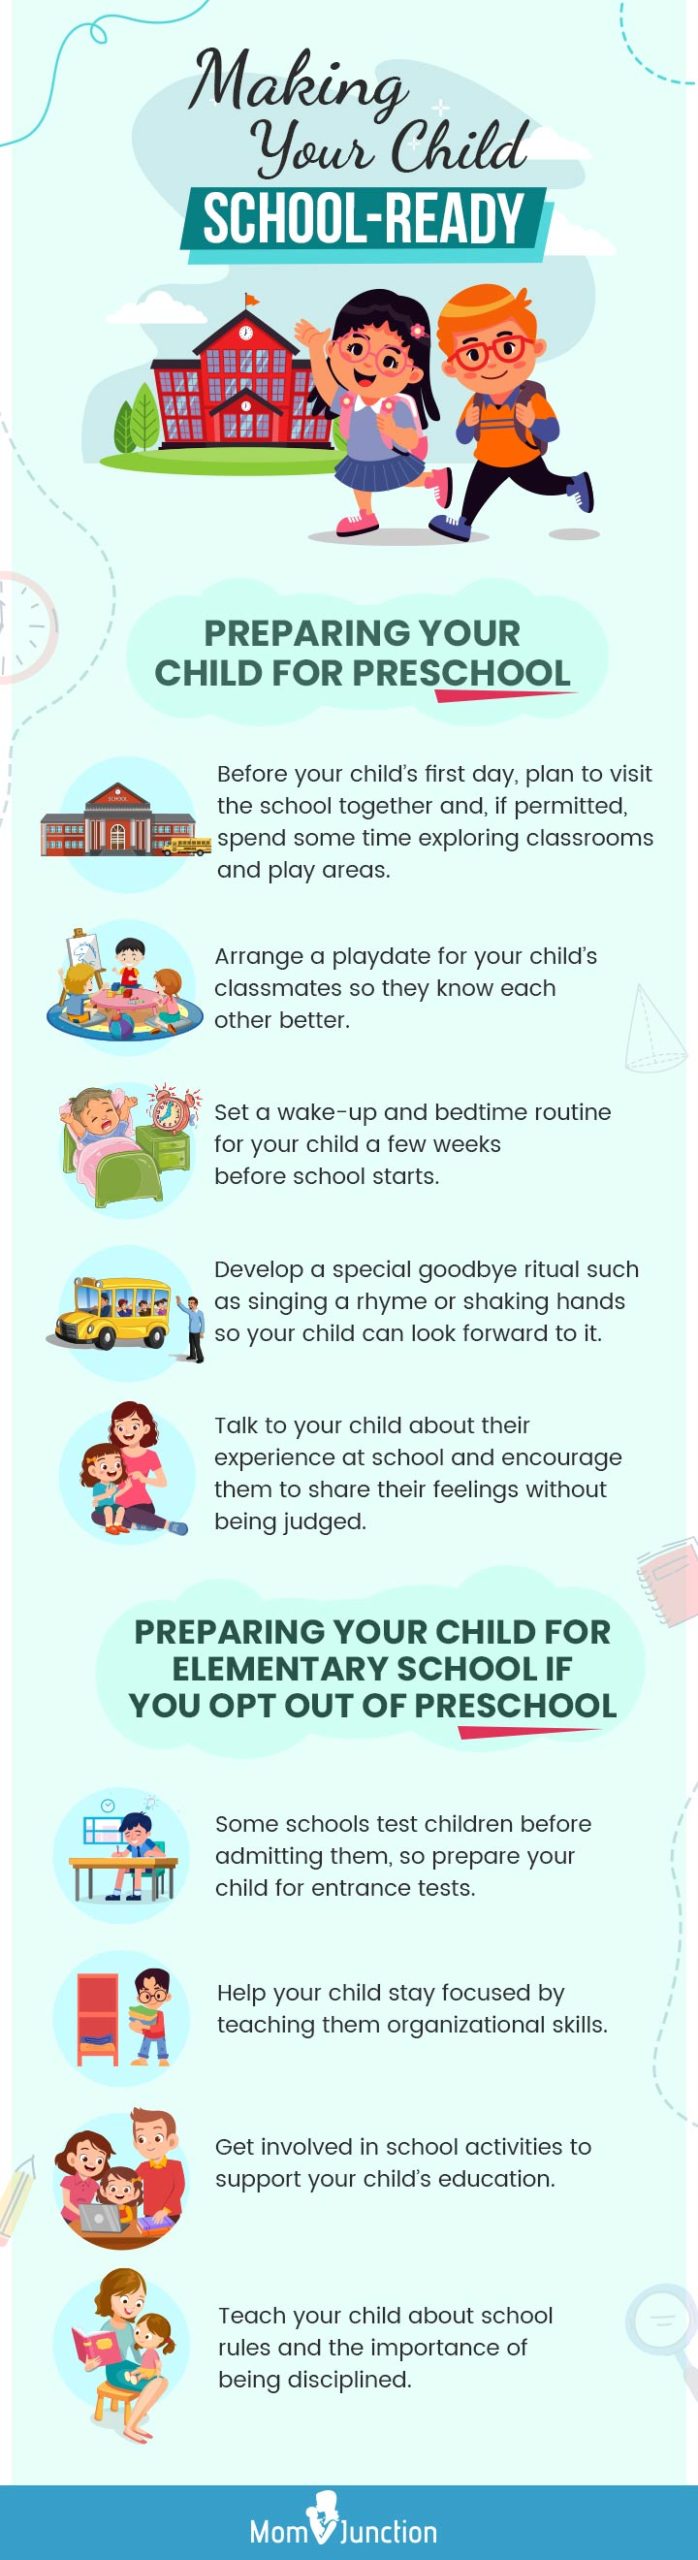 making your child school ready [infographic]